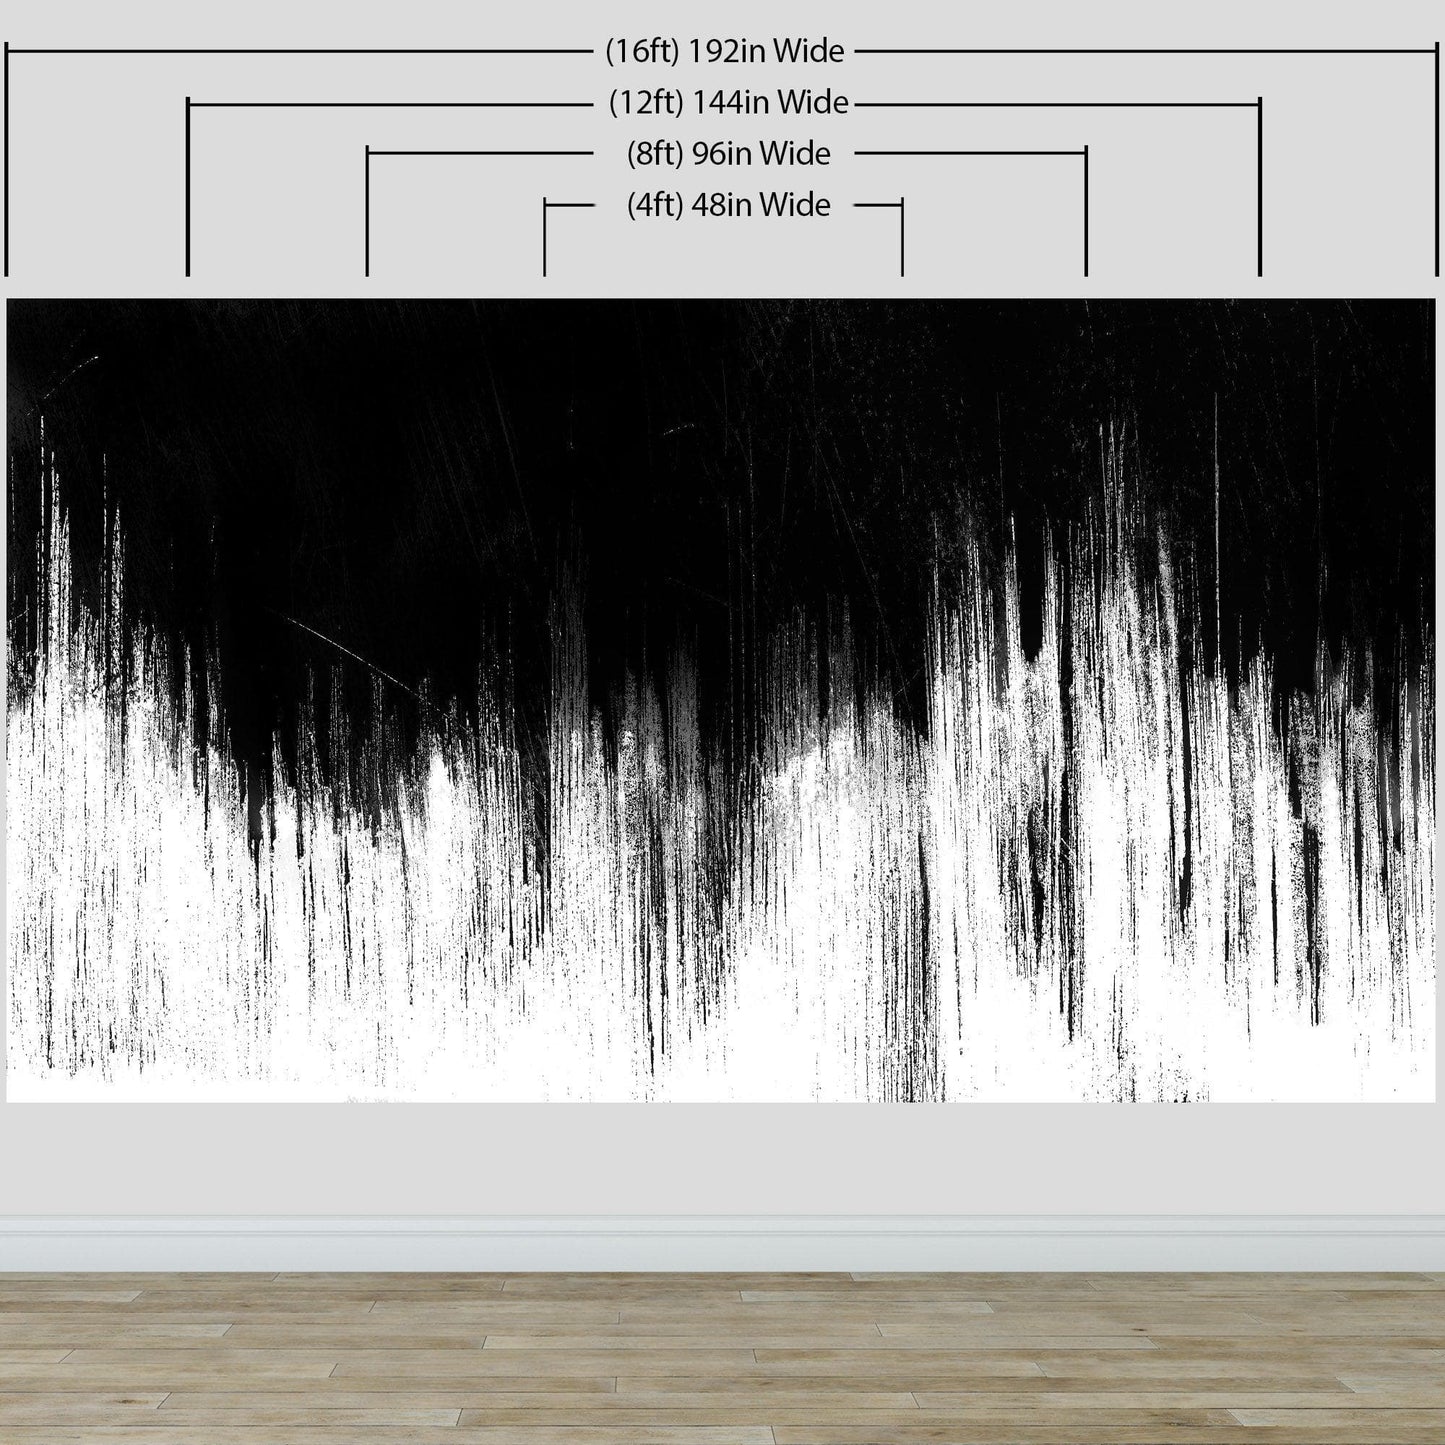 Black and White Grunge Line Art Wall Mural / Peel and Stick Wallpaper. #6336